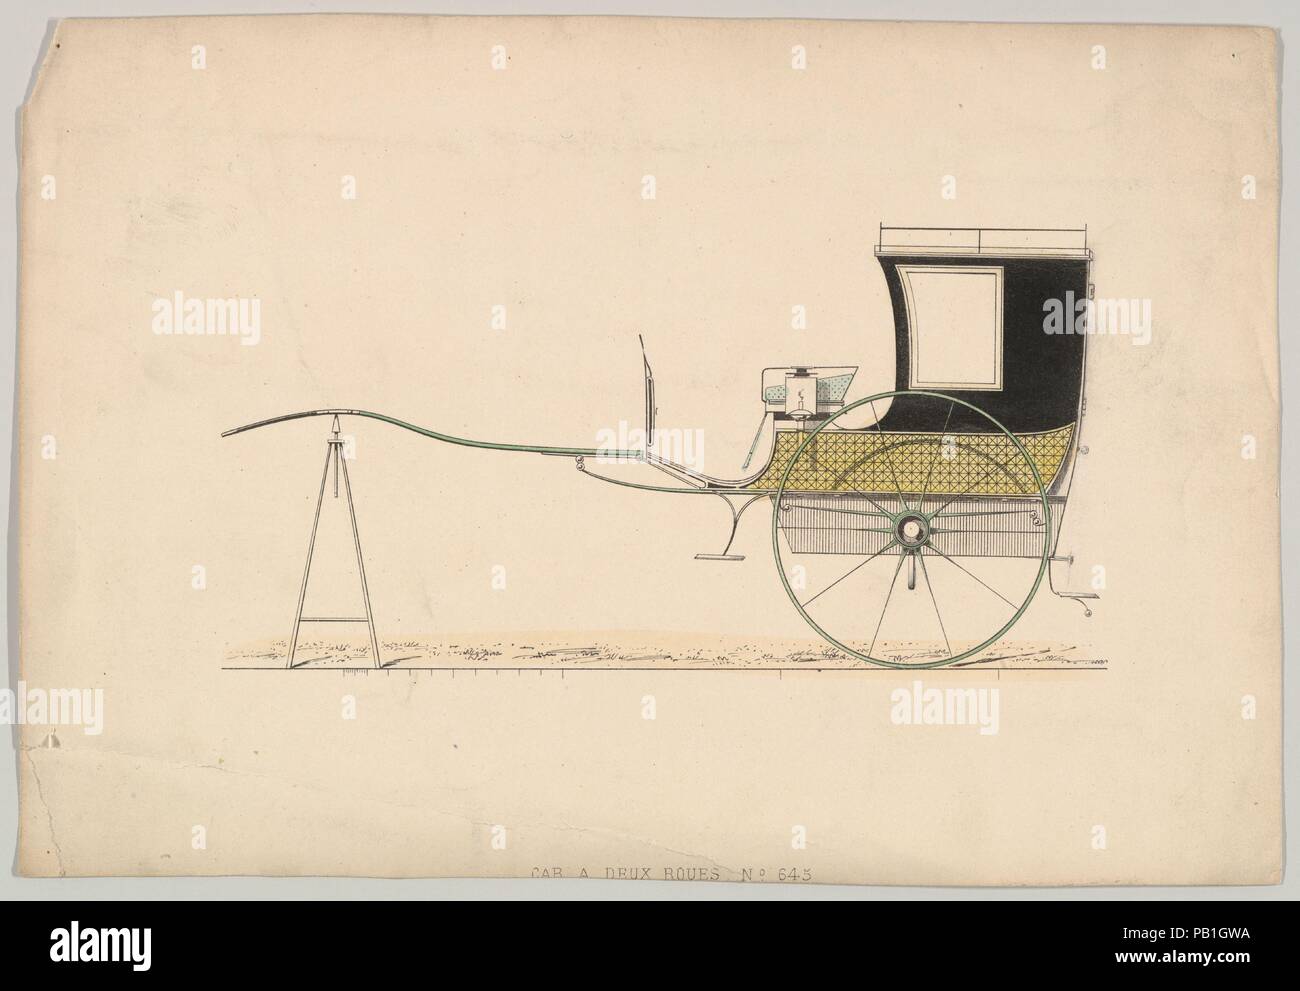 Design for 'Car à Deux Roues' (Vehicle with two wheels). Dimensions: sheet: 6 1/2 x 9 in. (16.5 x 22.9 cm). Date: ca. 1870.  Brewster & Company History  Established in 1810 by James Brewster (1788-1866) in New Haven, Connecticut, Brewster & Company, specialized in the manufacture of fine carriages. The founder opened a New York showroom in 1827 at 53-54 Broad Street, and the company flourished under generations of family leadership. Expansion necessitated moves around lower Manhattan, with name changes reflecting shifts of management-James Brewster & Sons operated at 25 Canal Street, James Bre Stock Photo